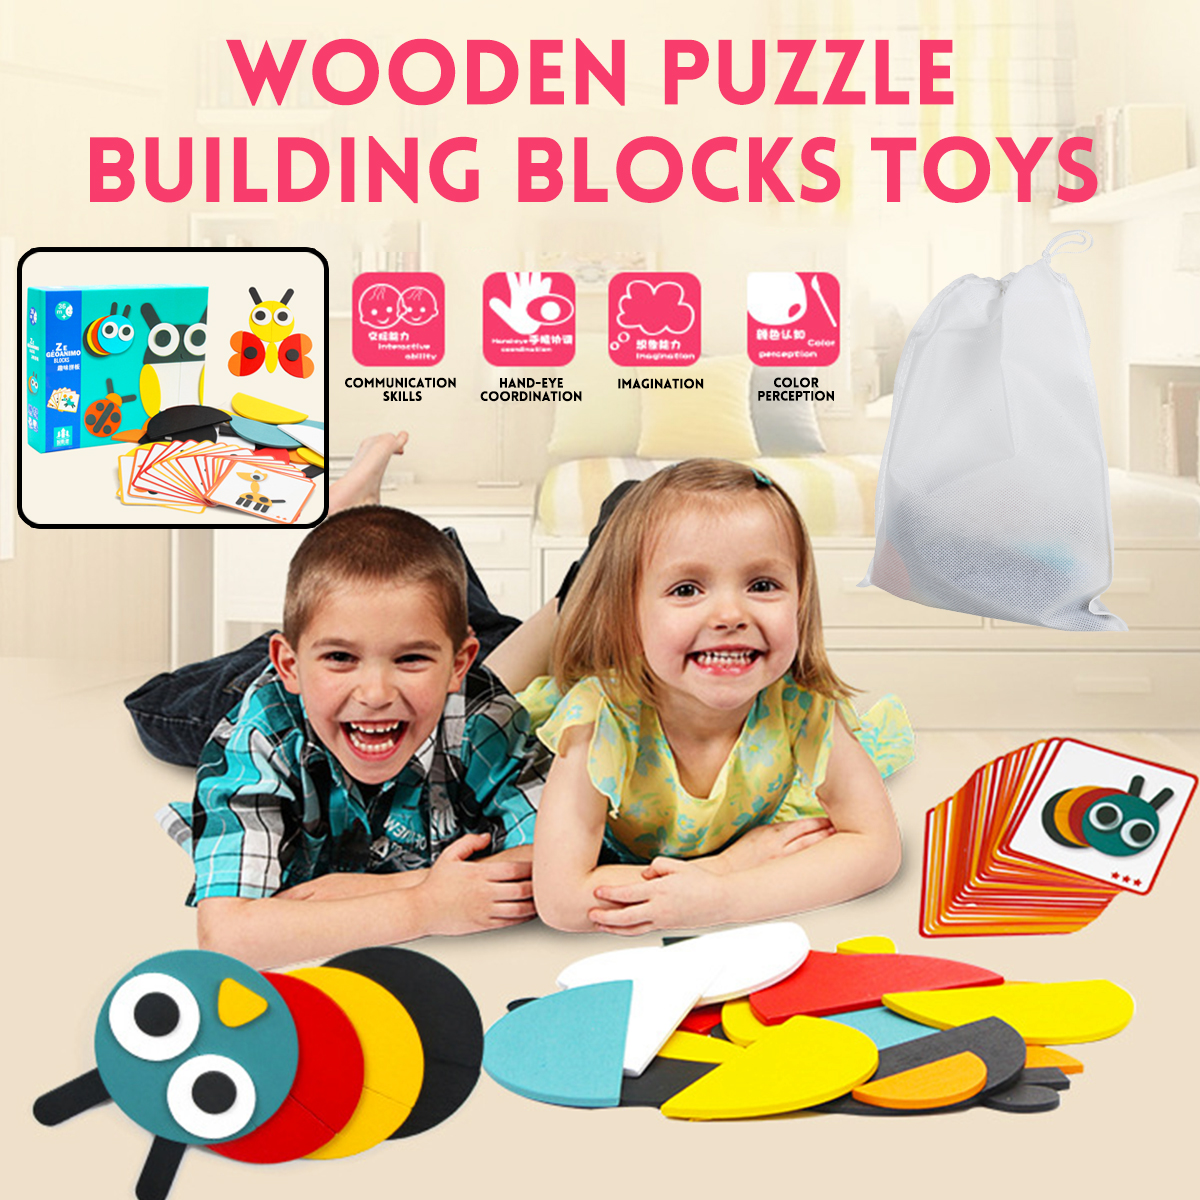 Wooden-Stereo-Puzzle-Building-Blocks-Kids-Early-Educational-Learning-Toys-Gifts-1709243-3